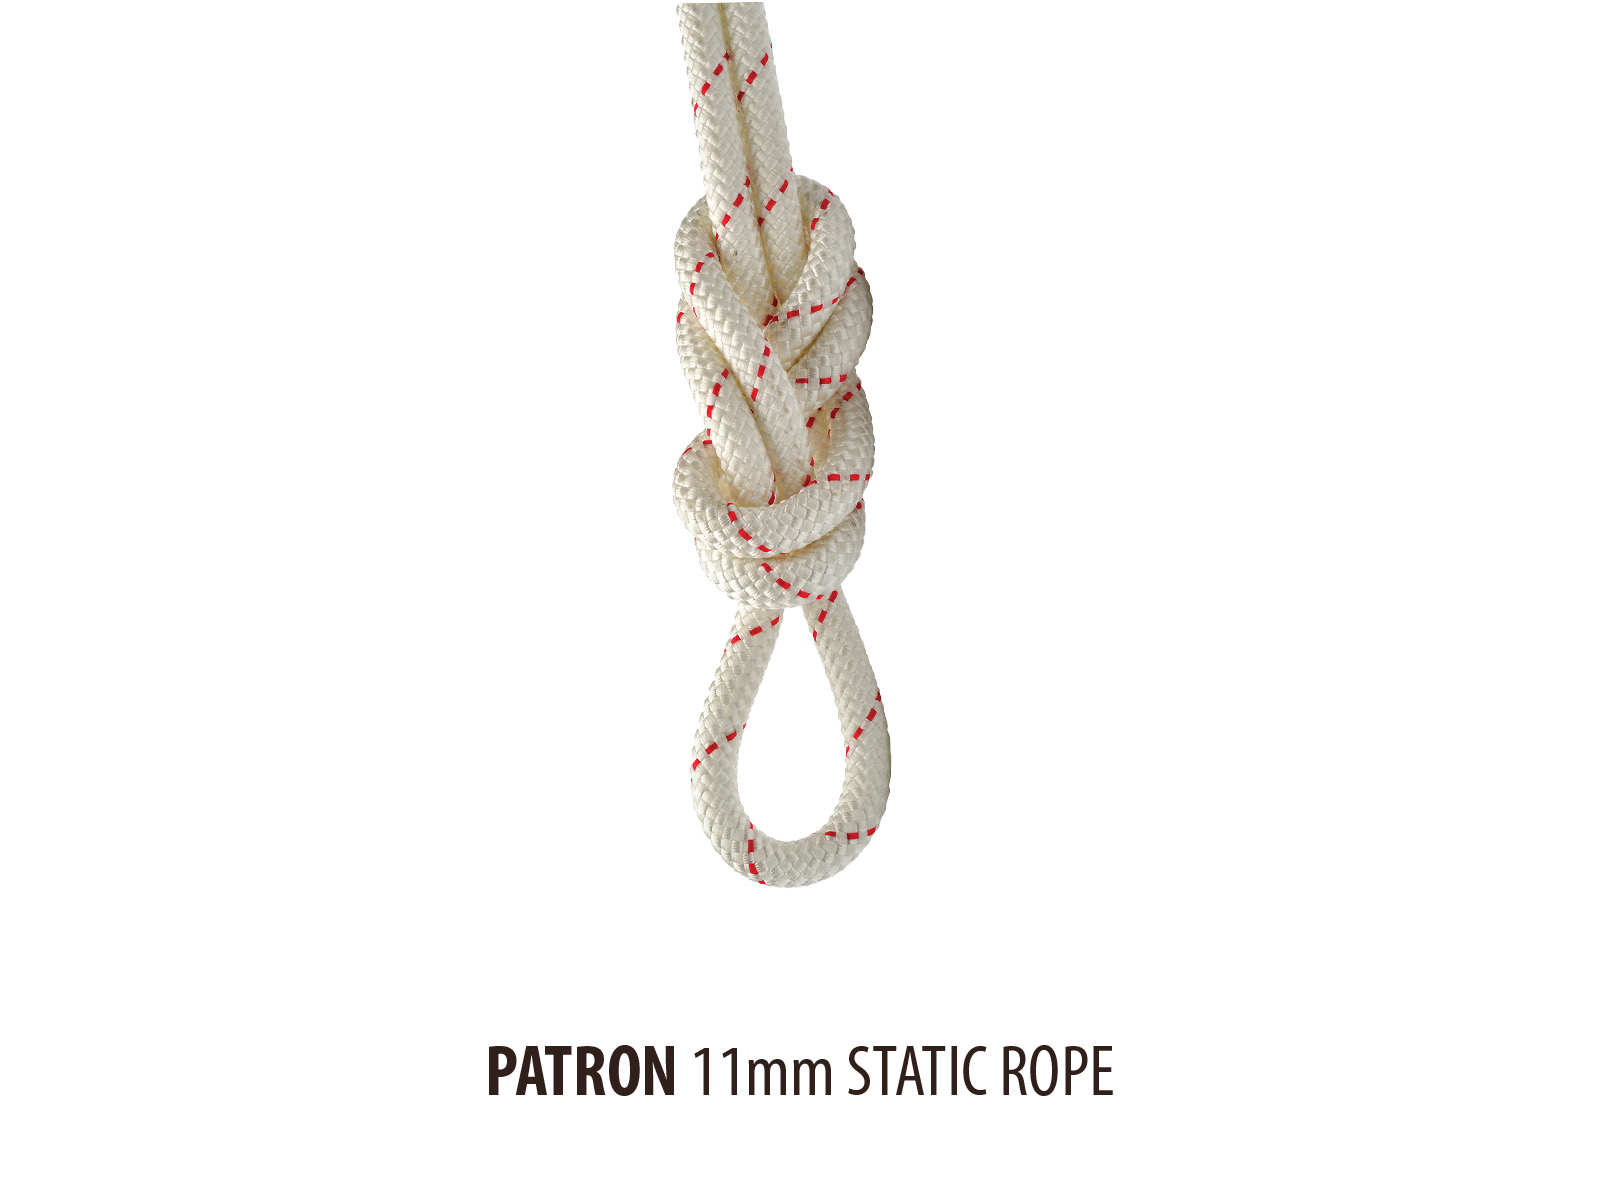 Teufelberger Patron 11mm Static Rope